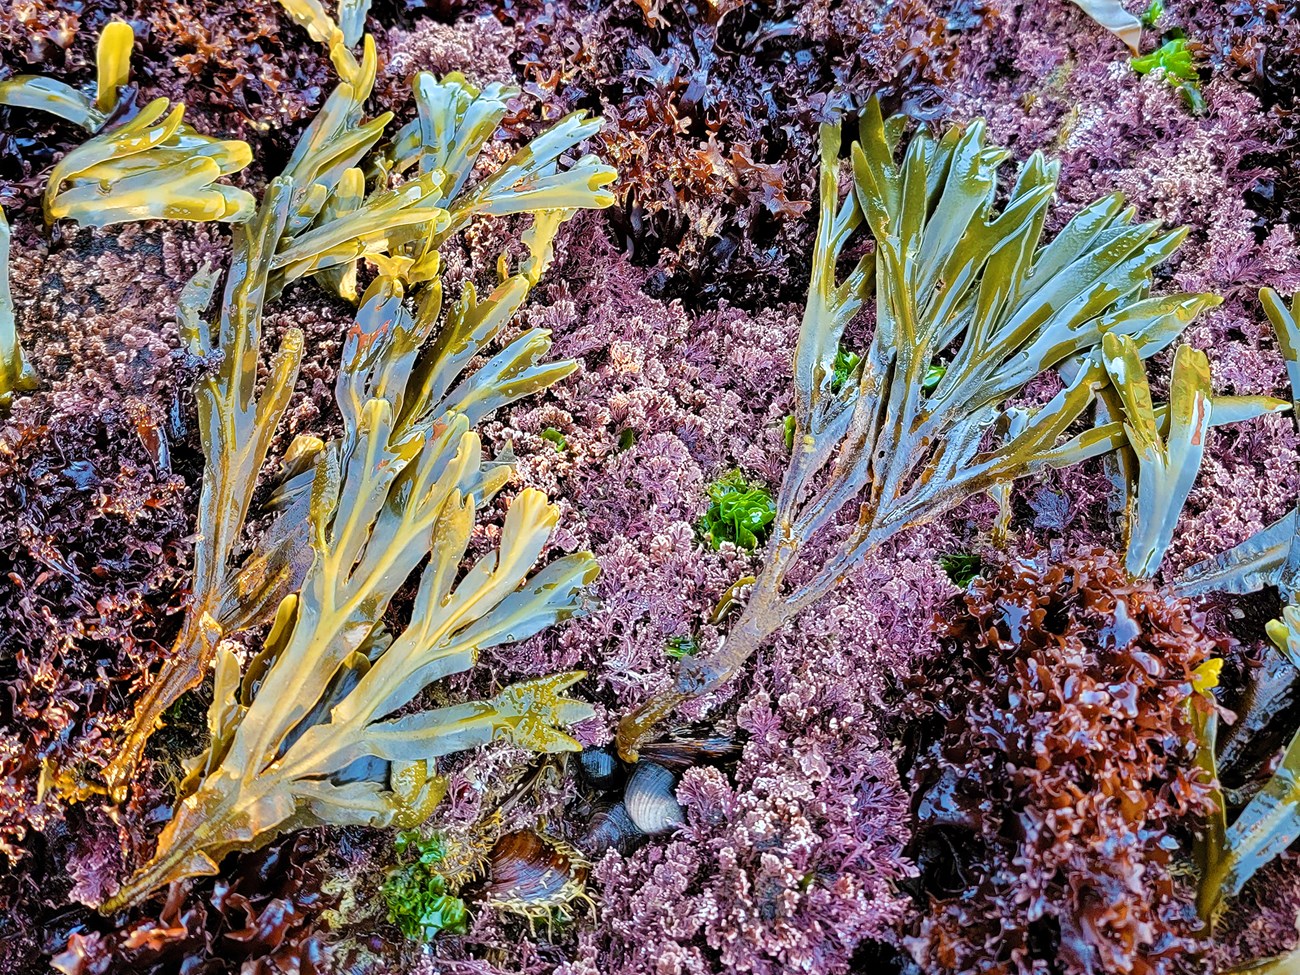 Patch of exposed intertidal seaweeds and algae in a patchwork of smooth and shaggy textures, and jewel tone shades of green, red, and pink.